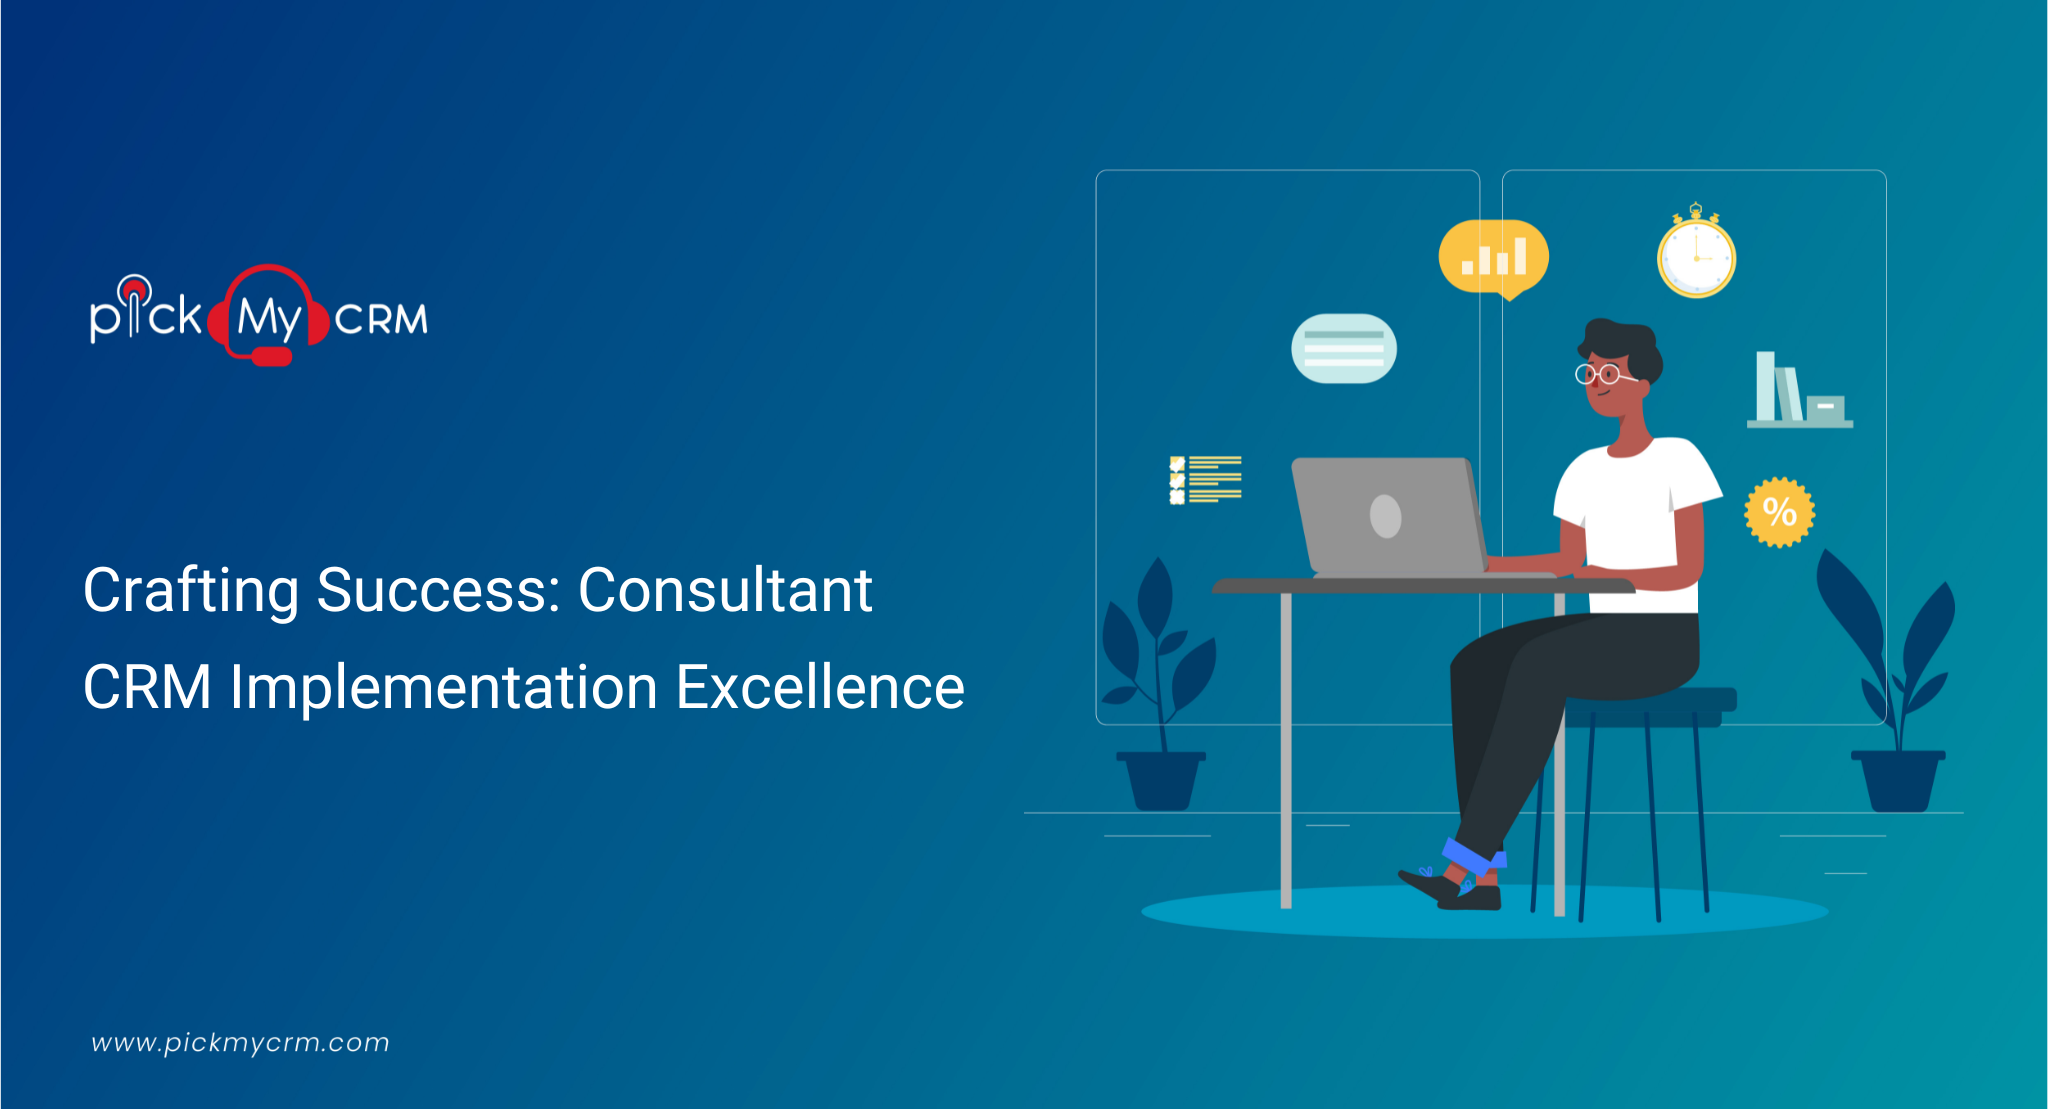 Crafting Success: Consultant CRM Implementation Excellence